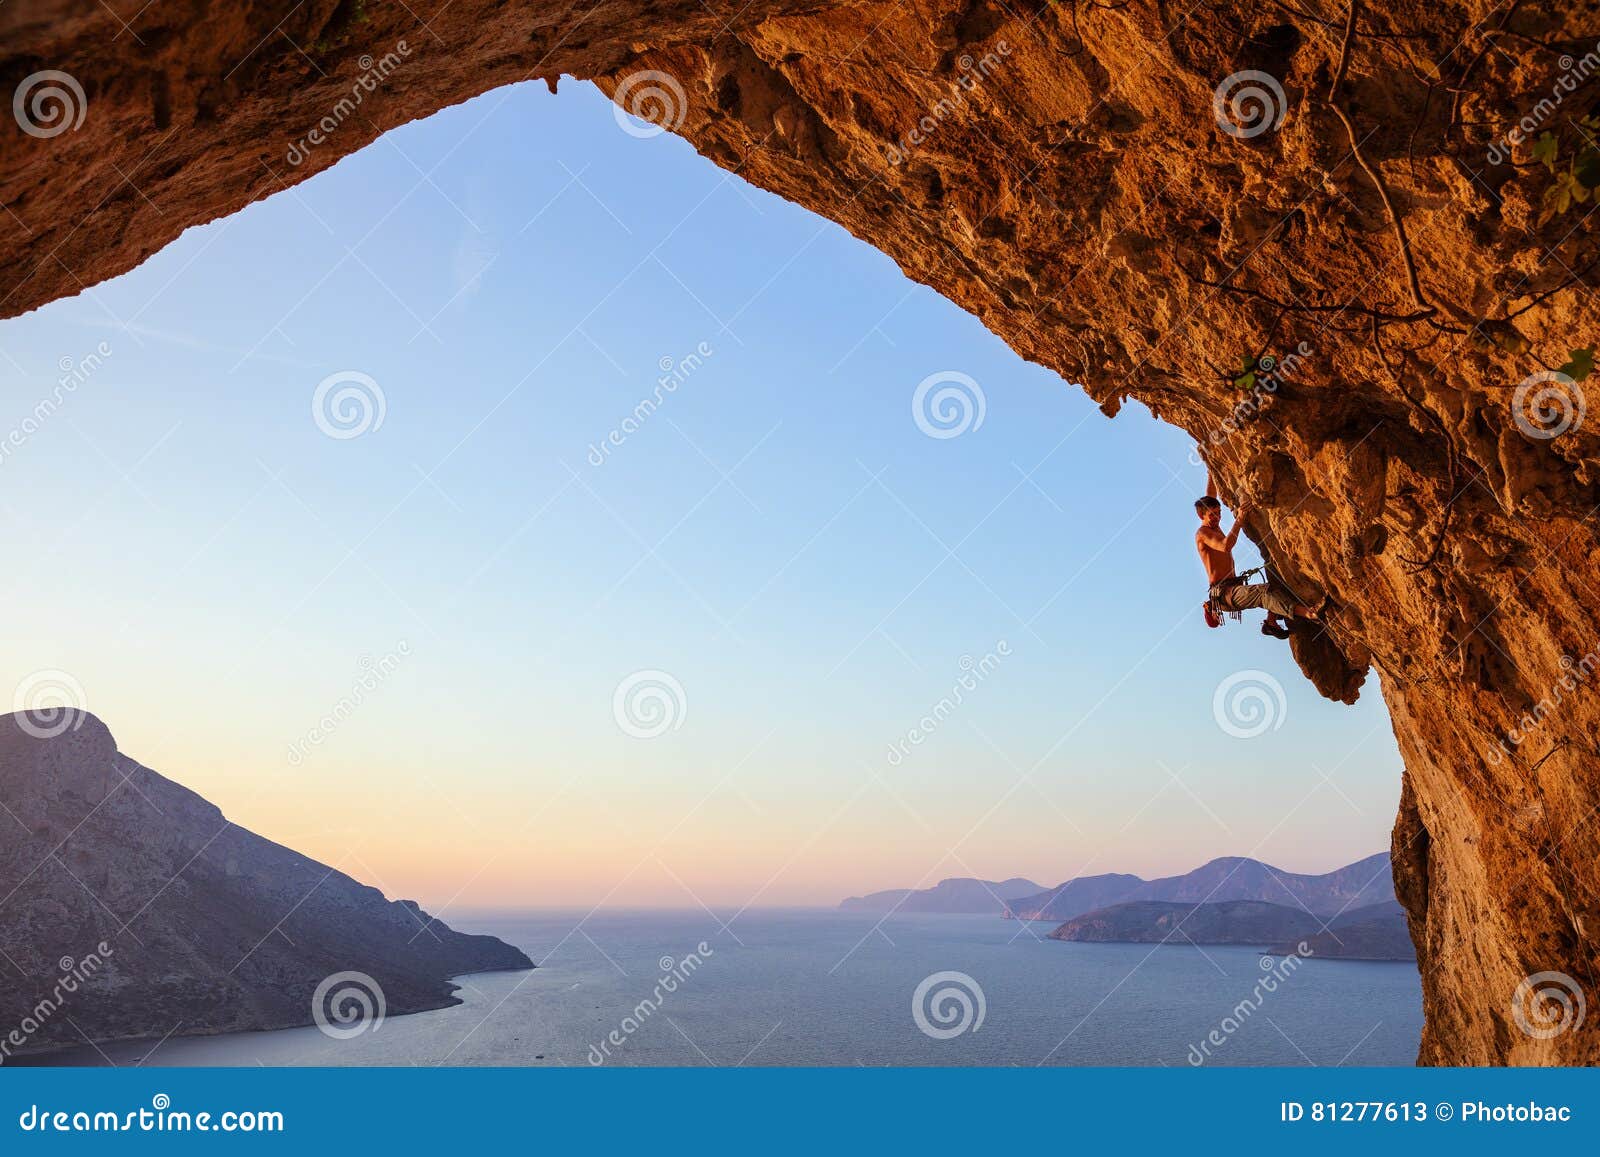 rock climber on overhanging cliff.